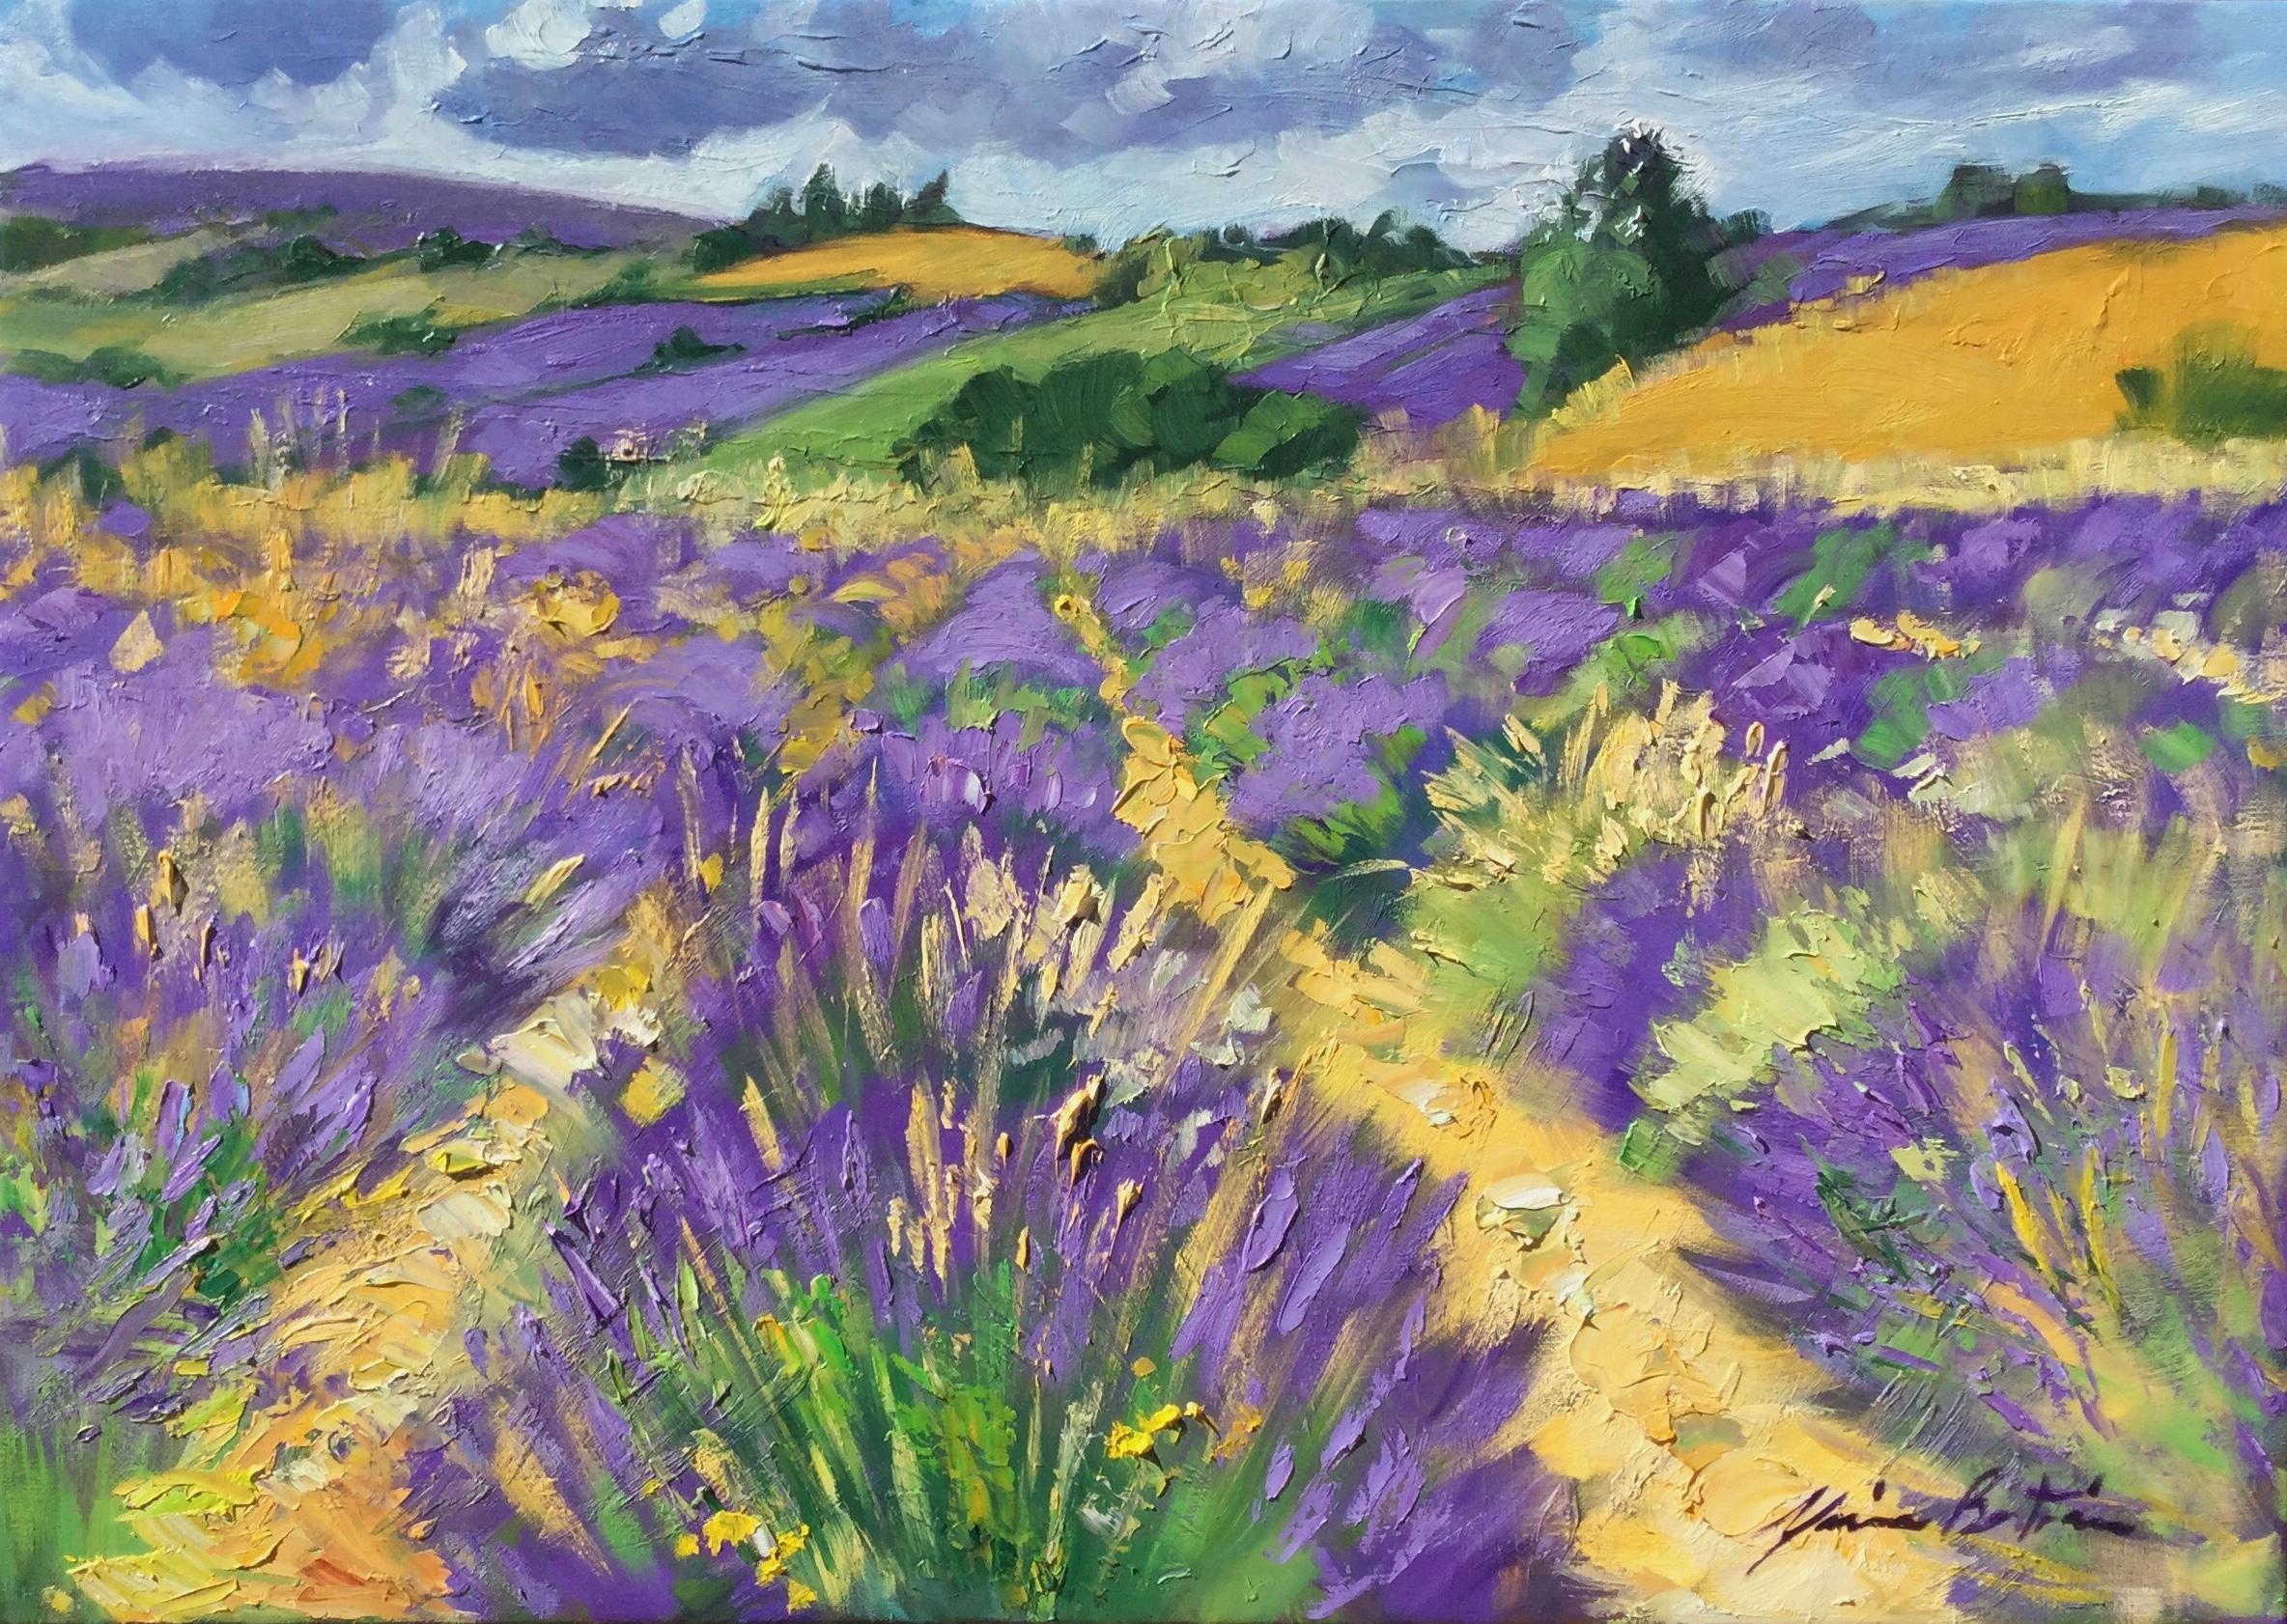 Maria Bertrán Landscape Painting - "Bright Lavender Fields In Ferrasier" Contemporary Impressionist Oil of Provence